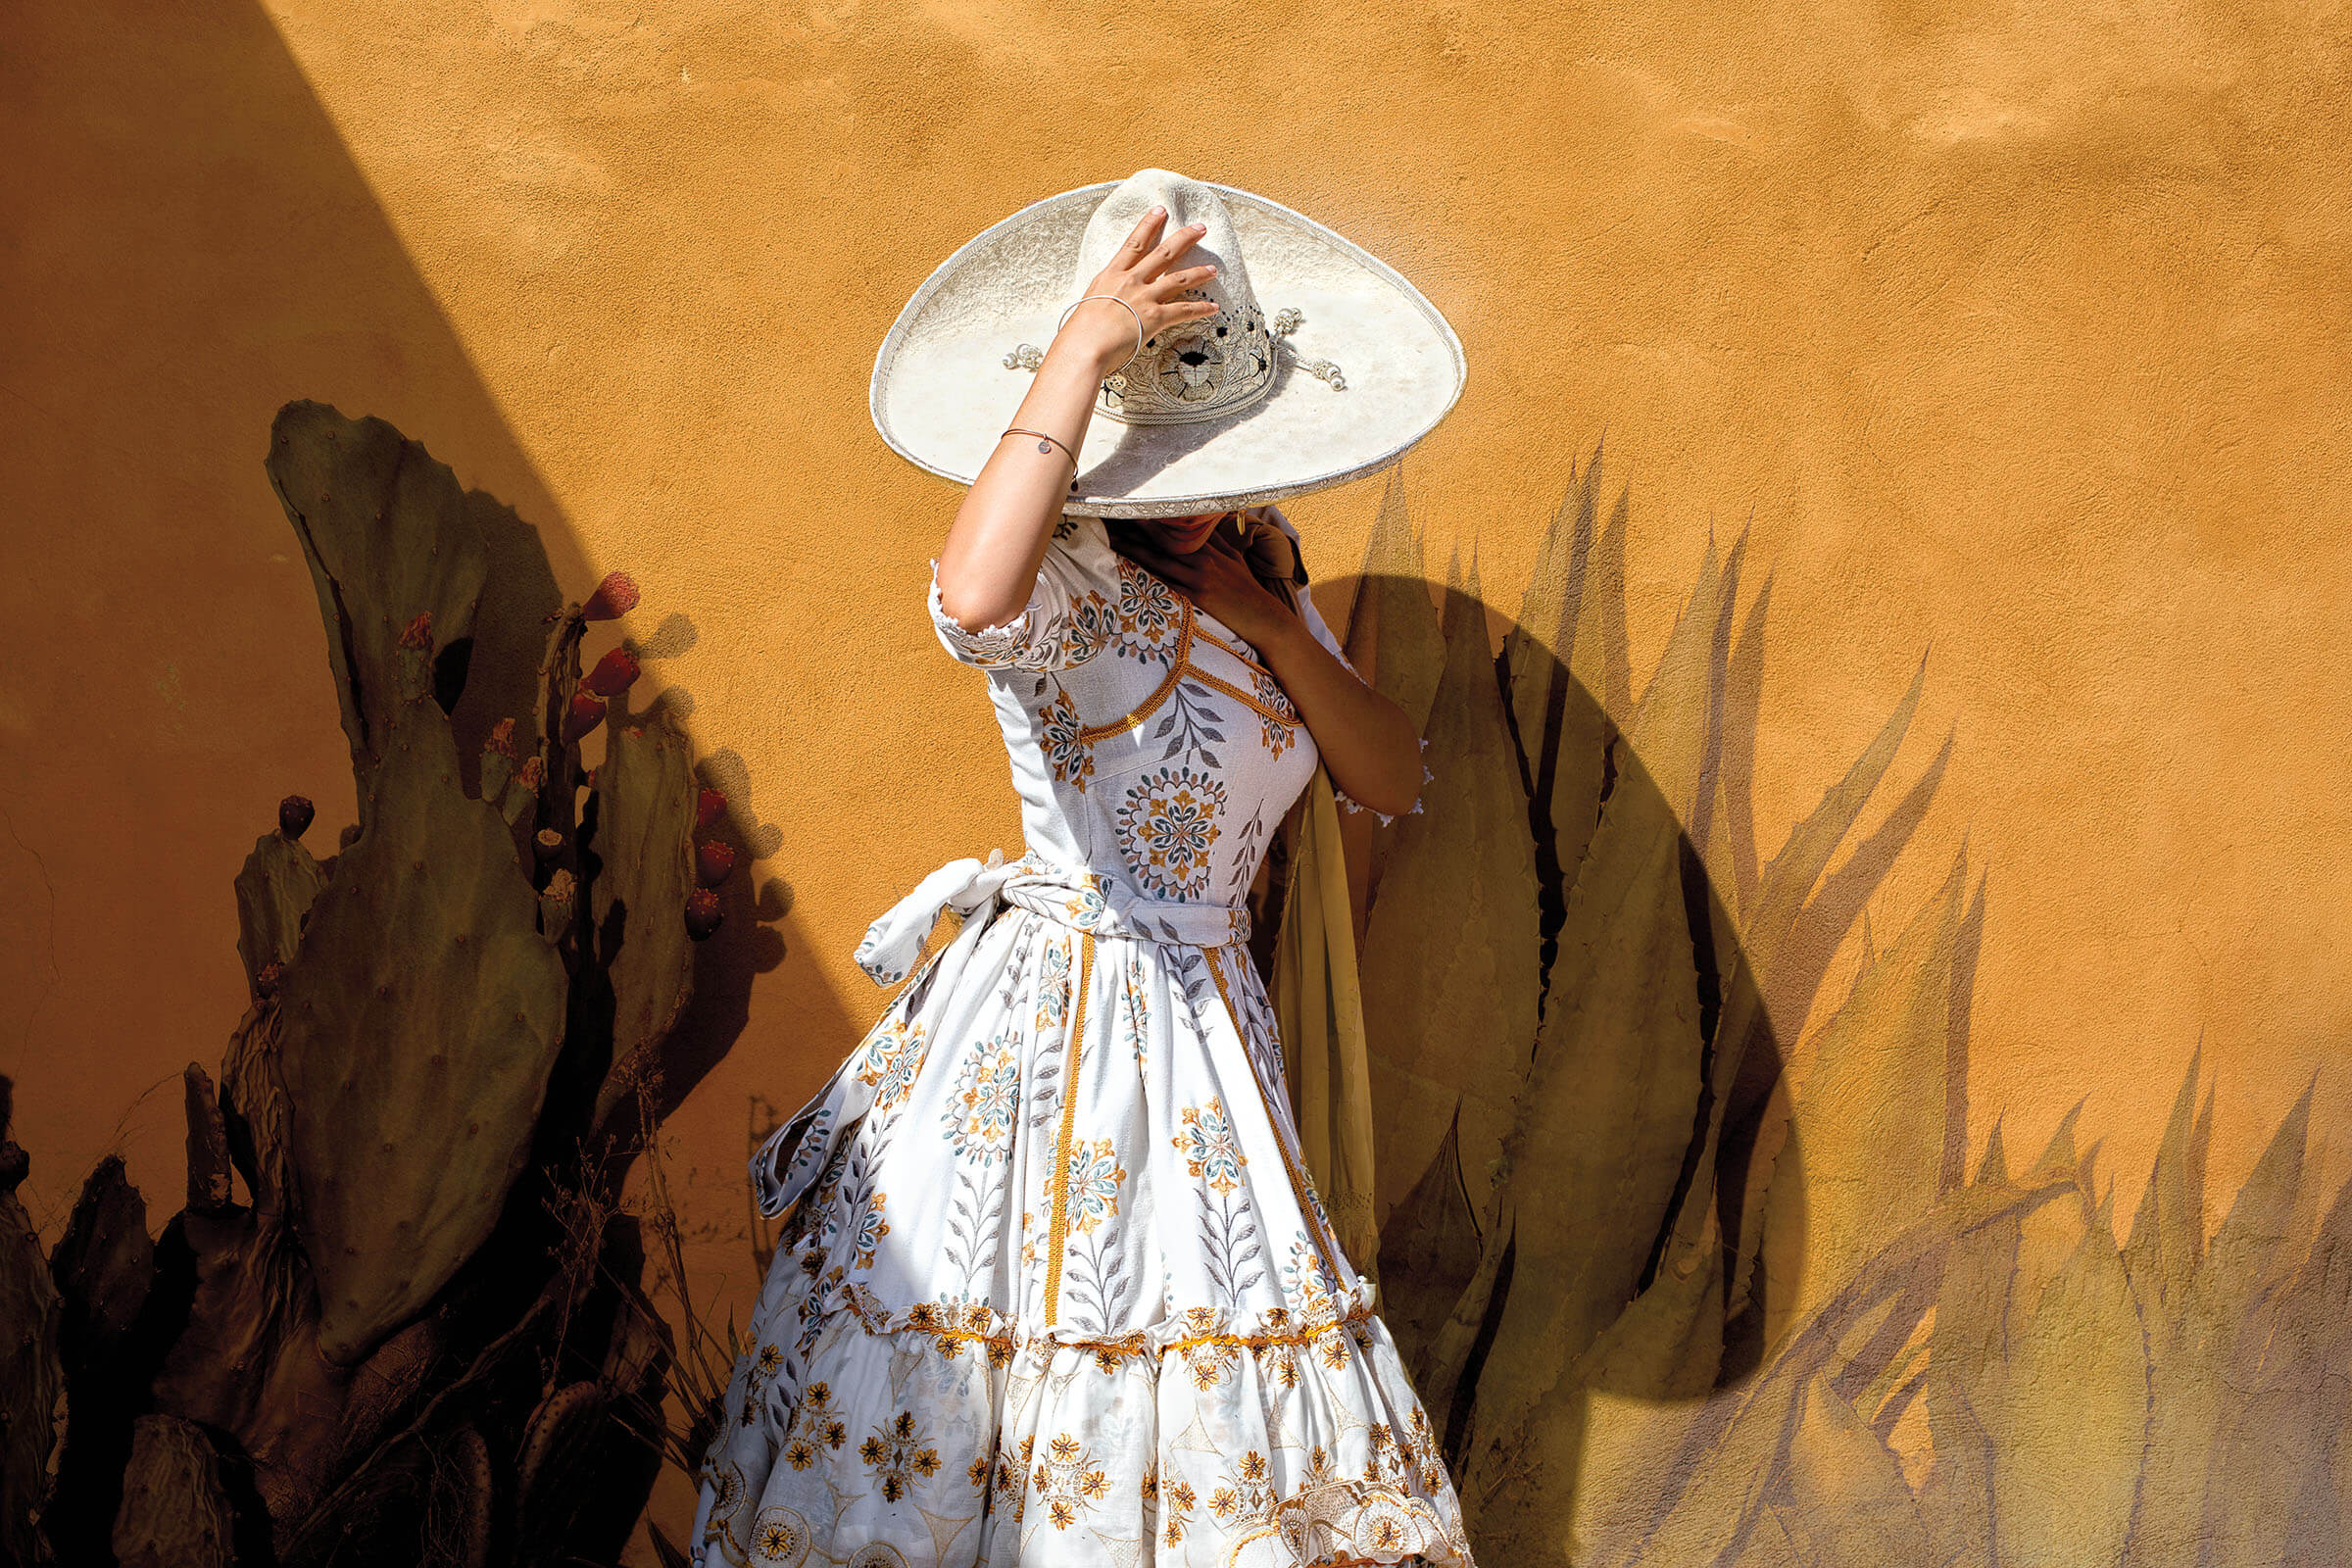 A woman in a white dress holds a large white sombrero over her head in front of a golden yellow painted wall